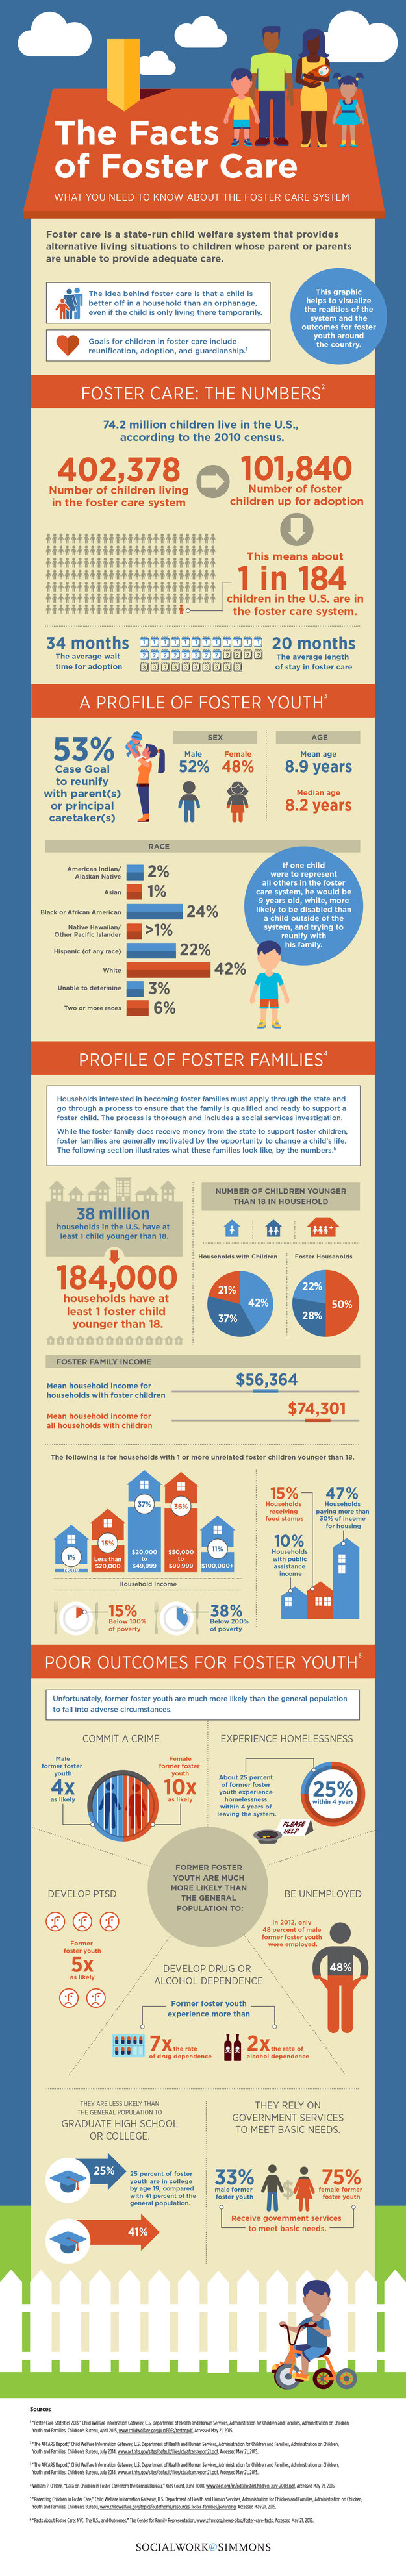 Infographic sharing facts about the foster care system.